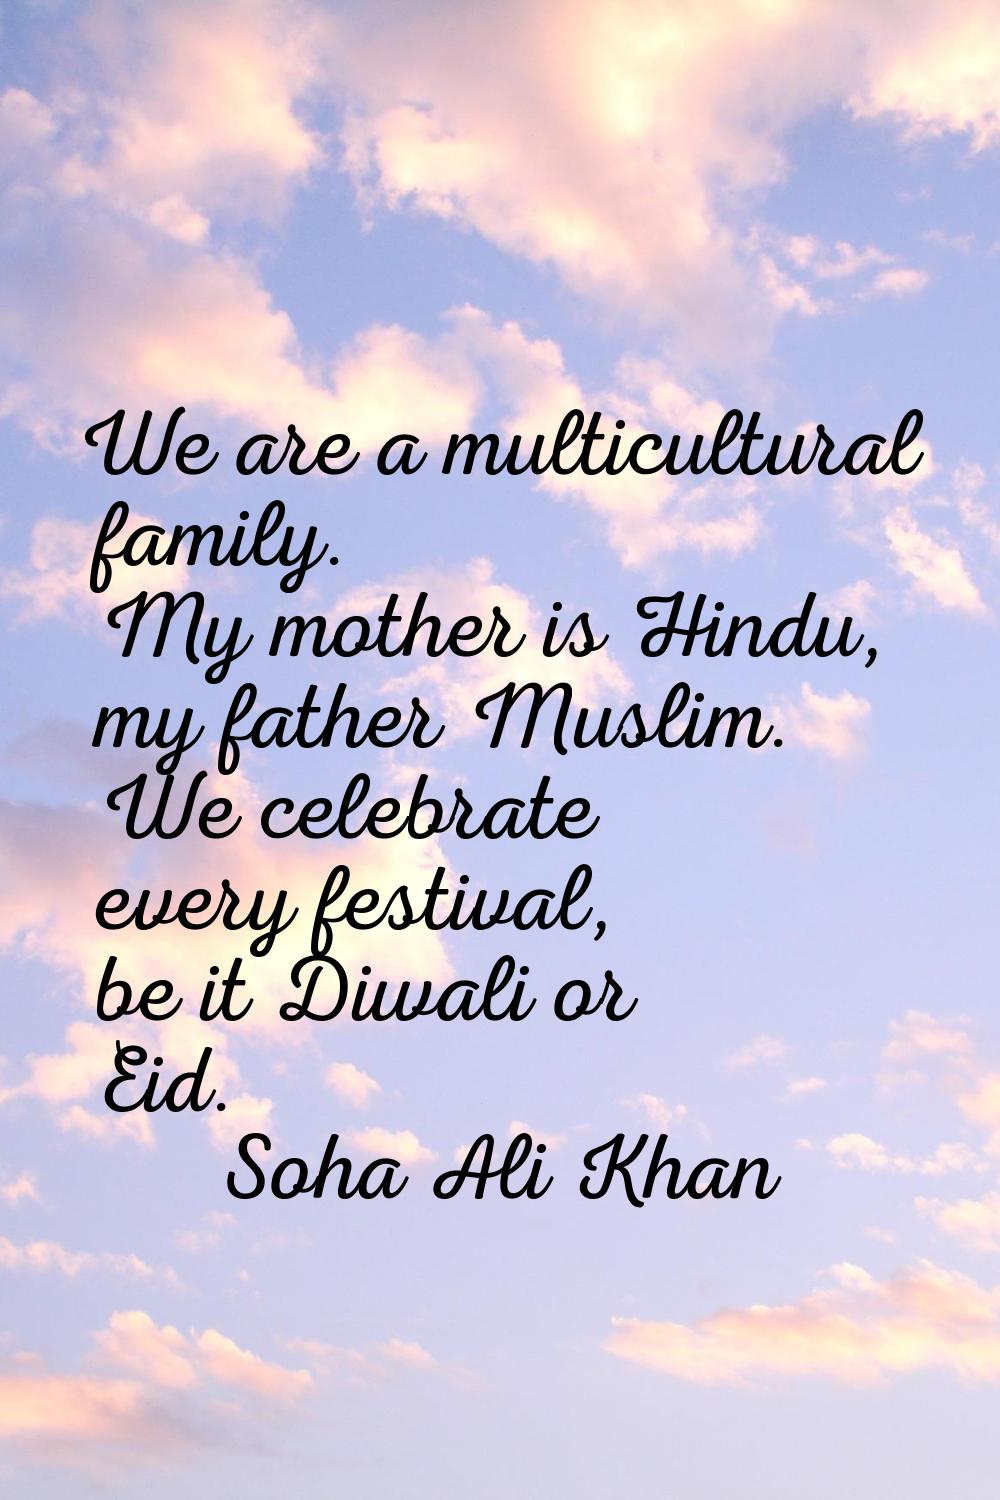 We are a multicultural family. My mother is Hindu, my father Muslim. We celebrate every festival, b